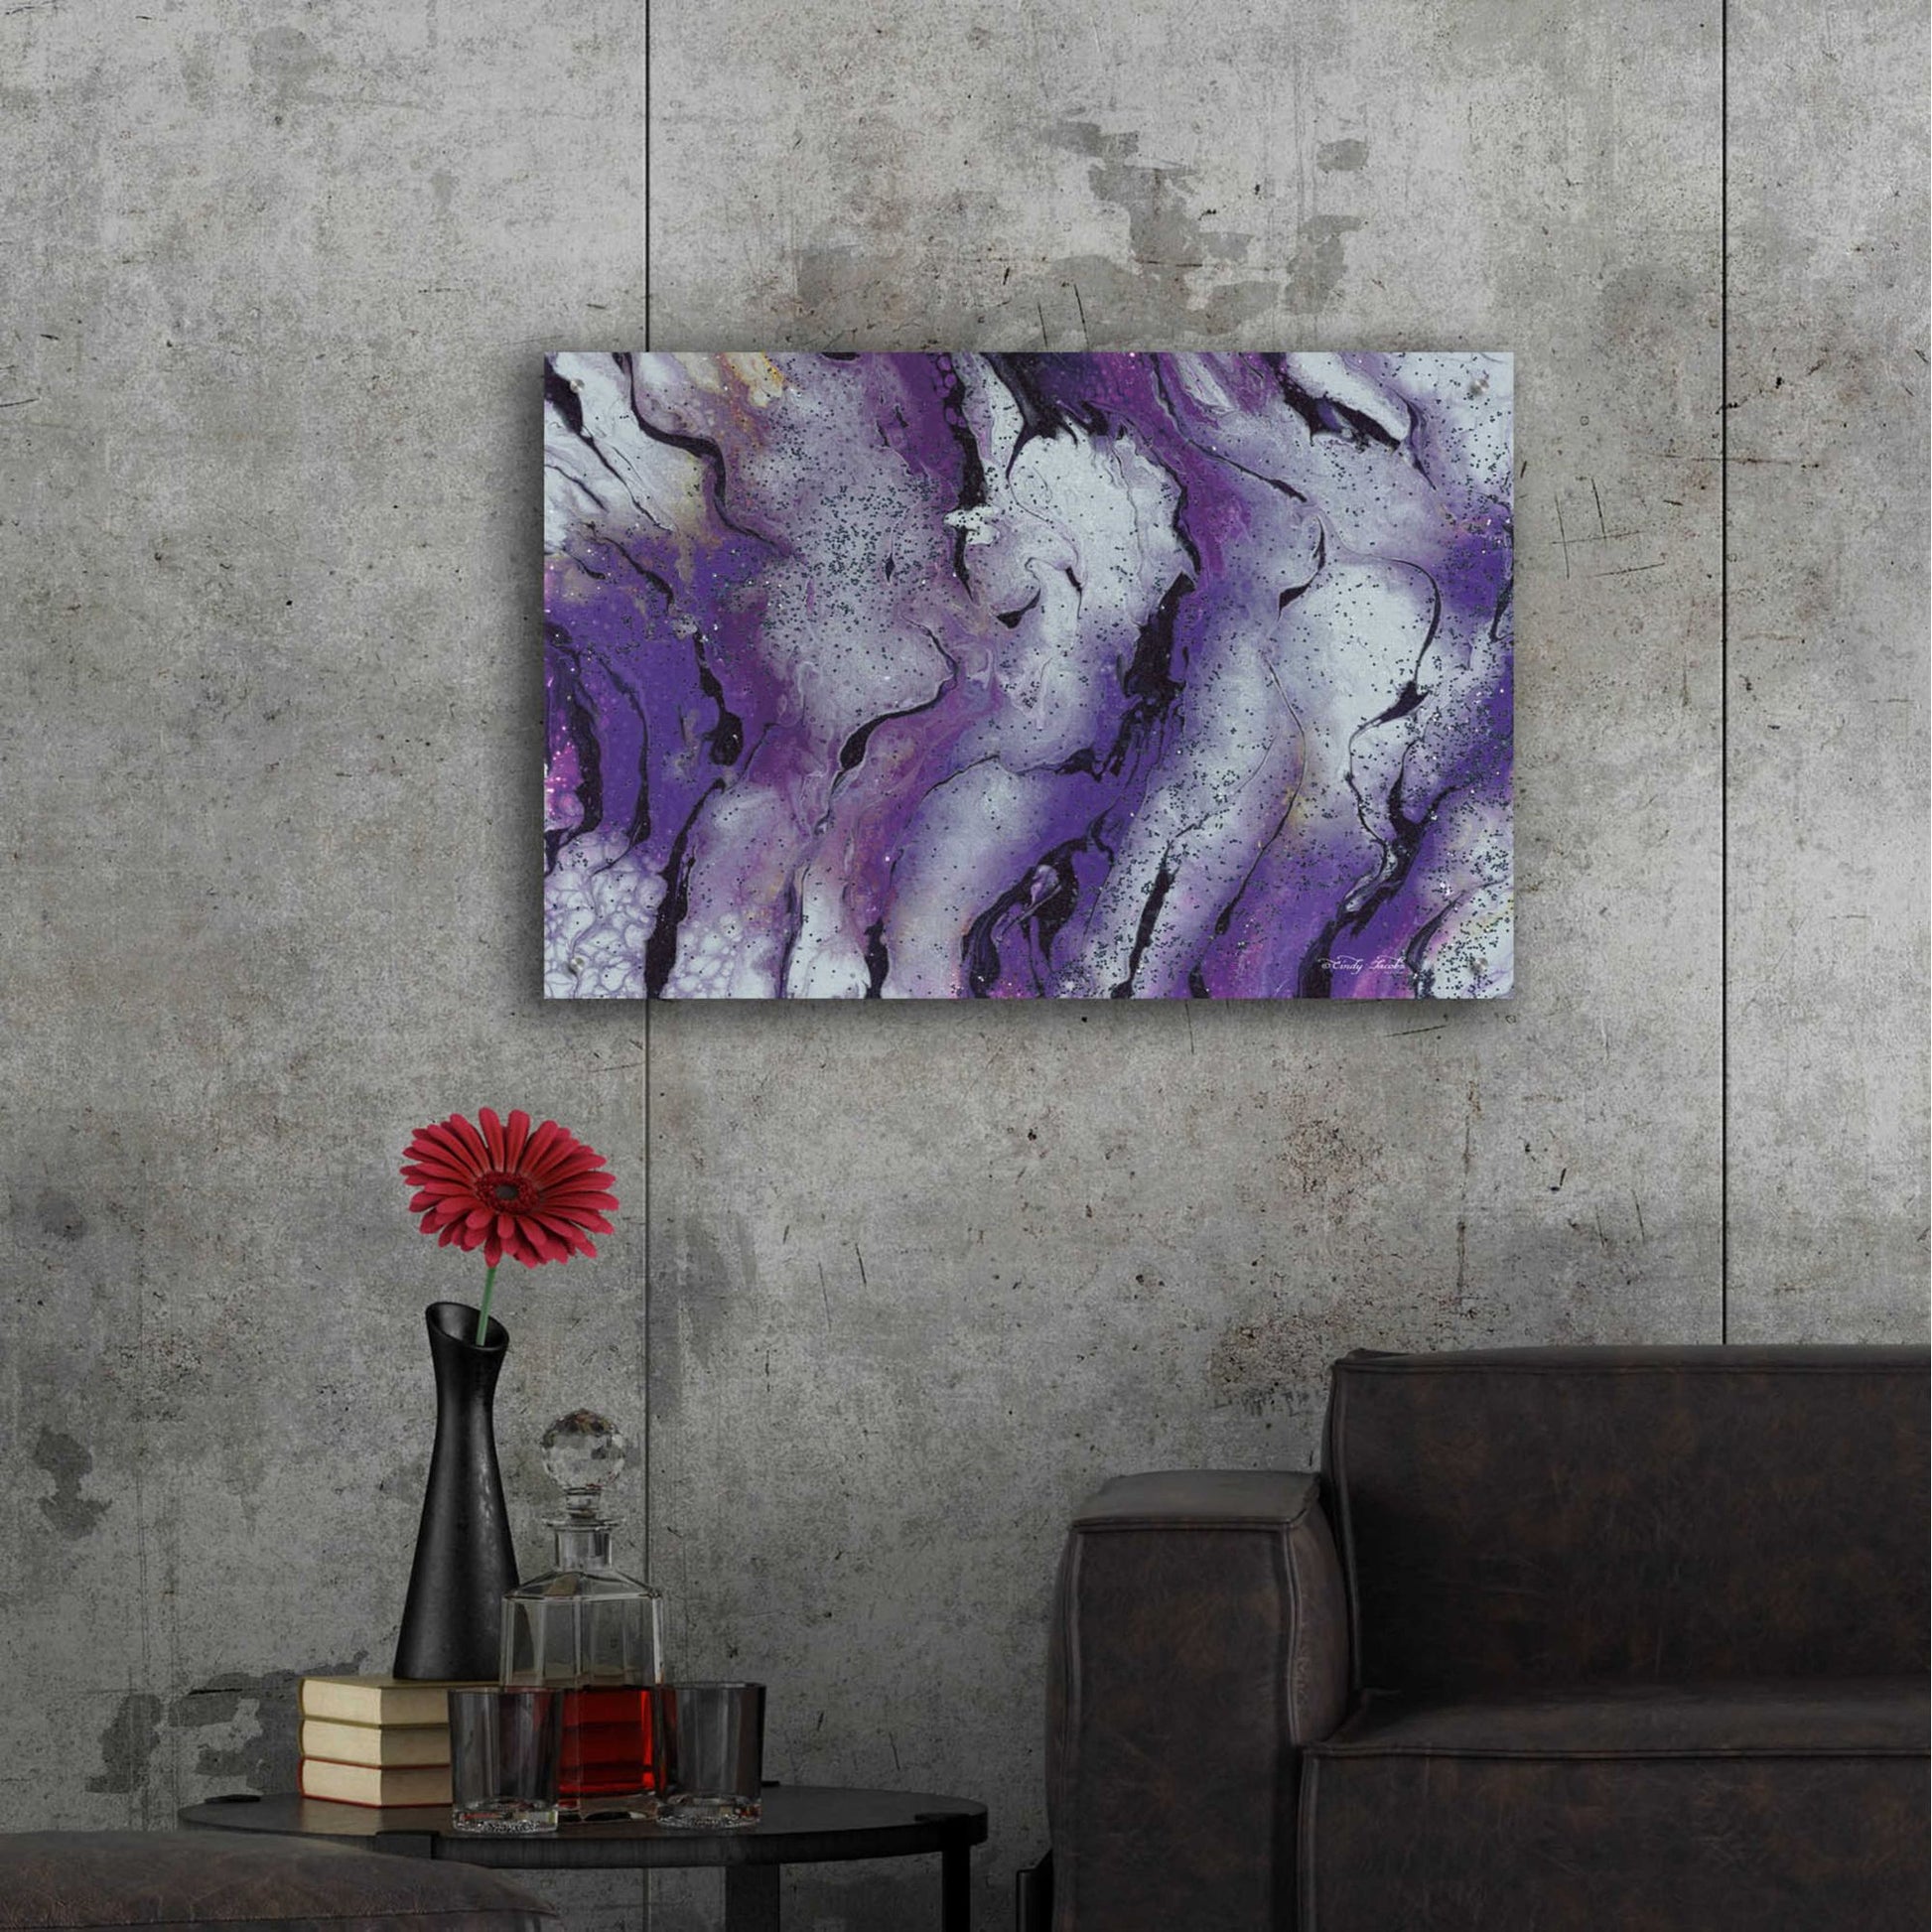 Epic Art 'Abstract in Purple III' by Cindy Jacobs, Acrylic Glass Wall Art,36x24